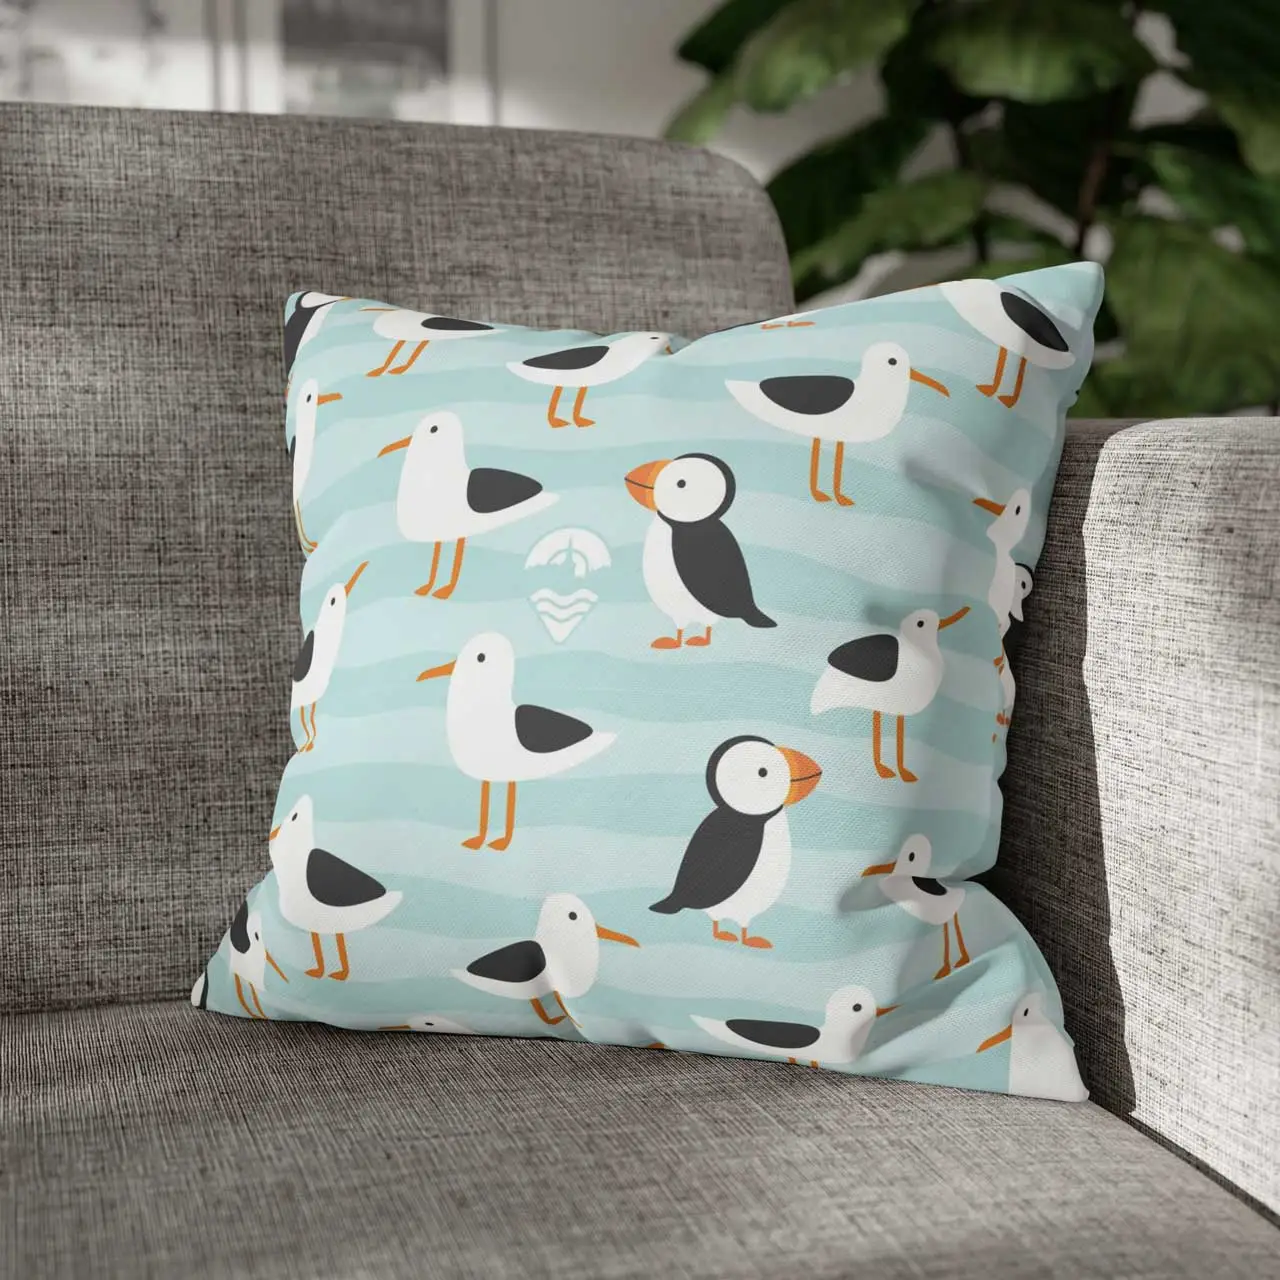 Around Tenby Puffins and Seagulls Cushion Covers